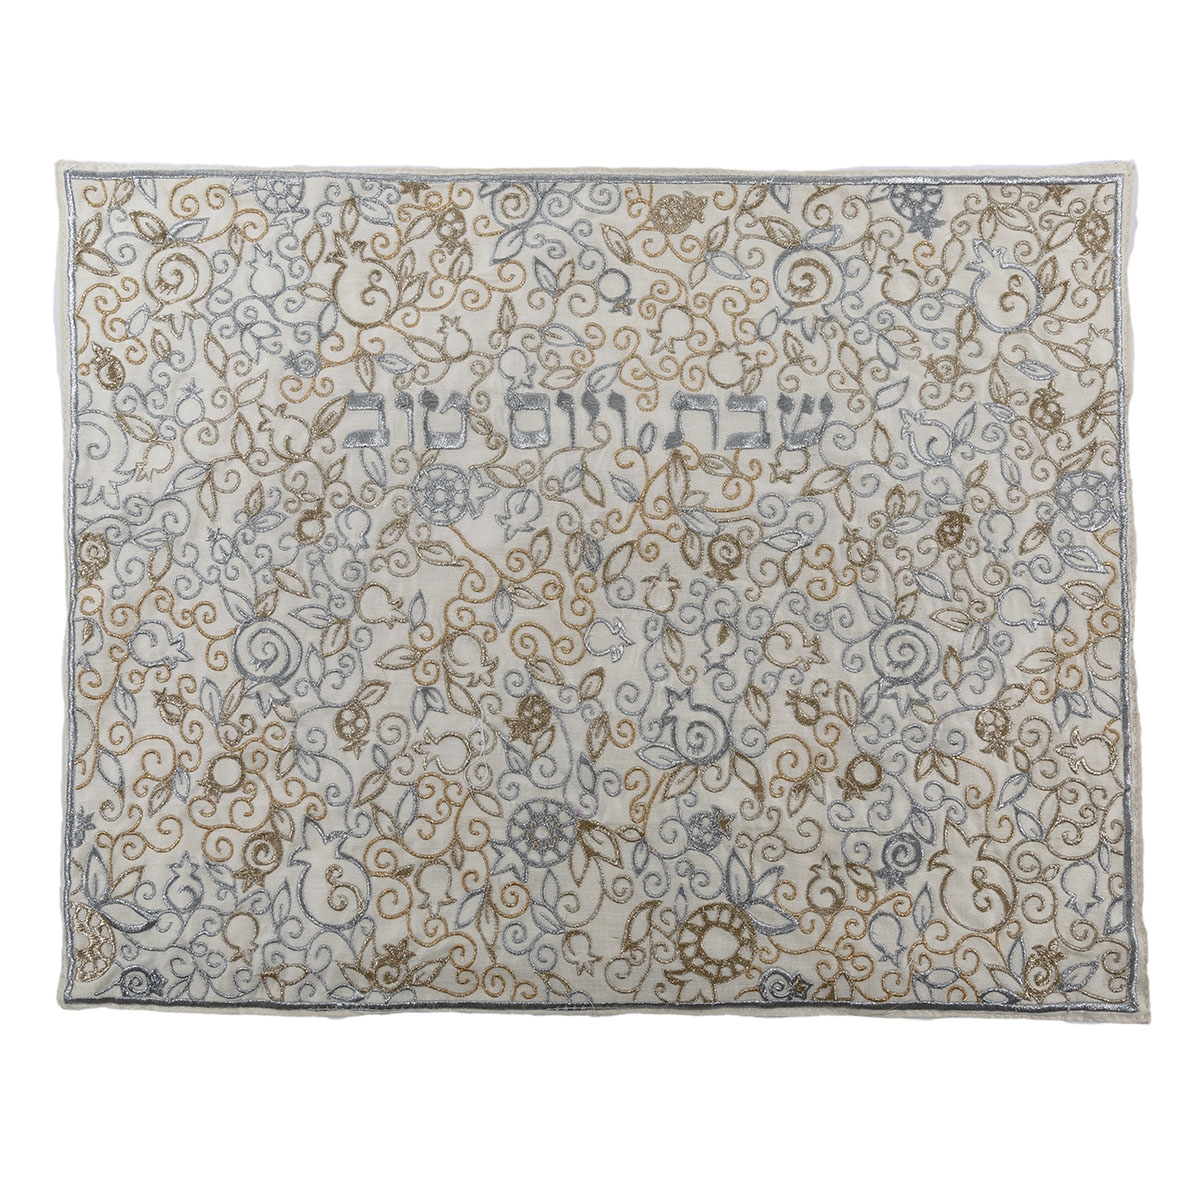 Yair Emanuel Embroidered Pomegranate Challah Cover – Gold and Silver - 1